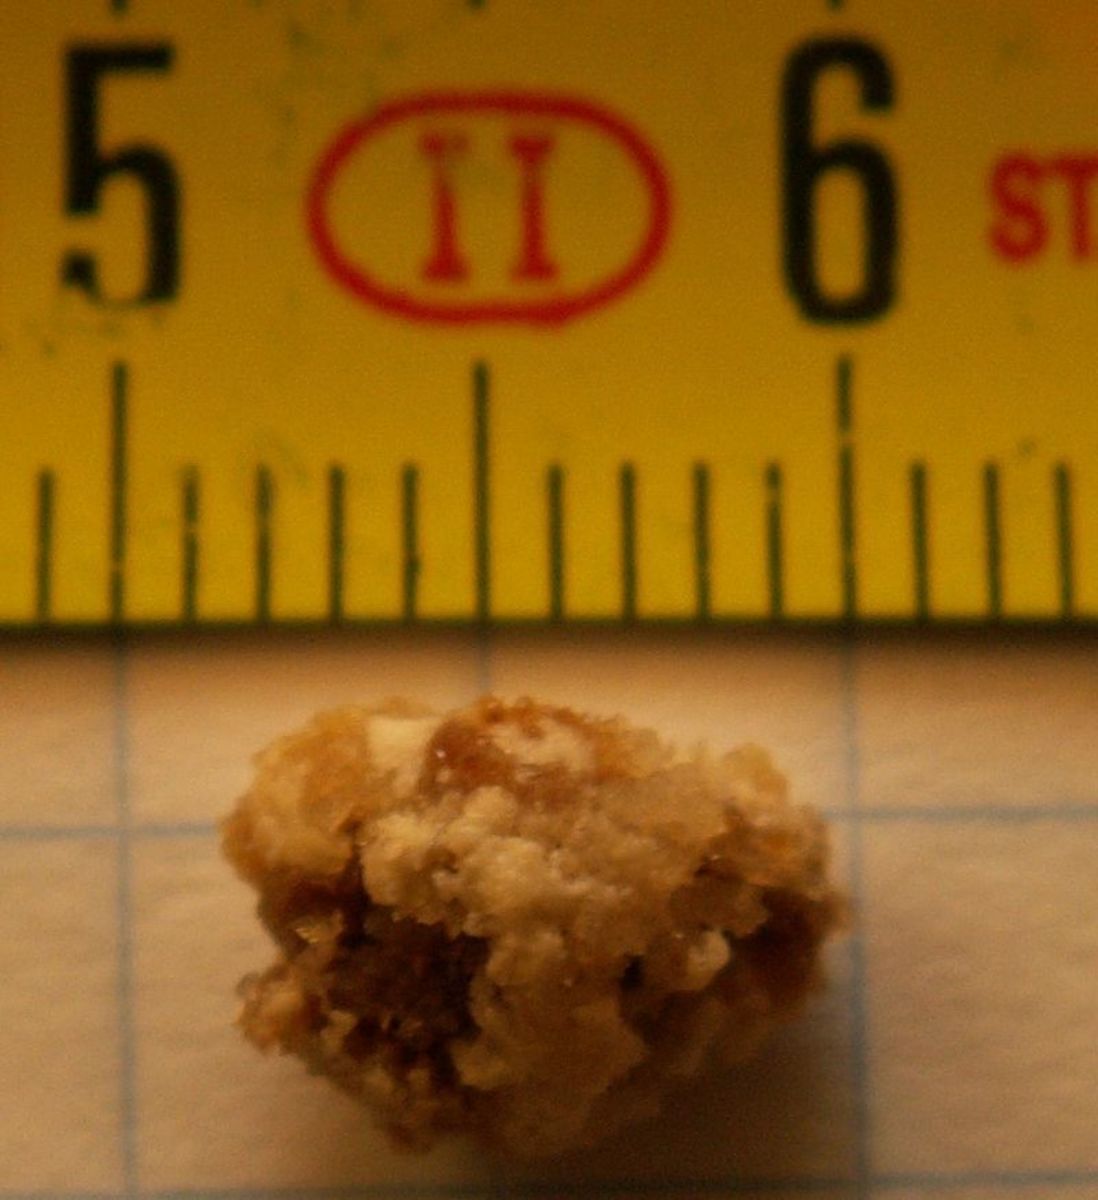 Alas, this is not Mel's beloved kidney stone, which has been long lost, but it is of the same 8mm size and approximate shape of his.